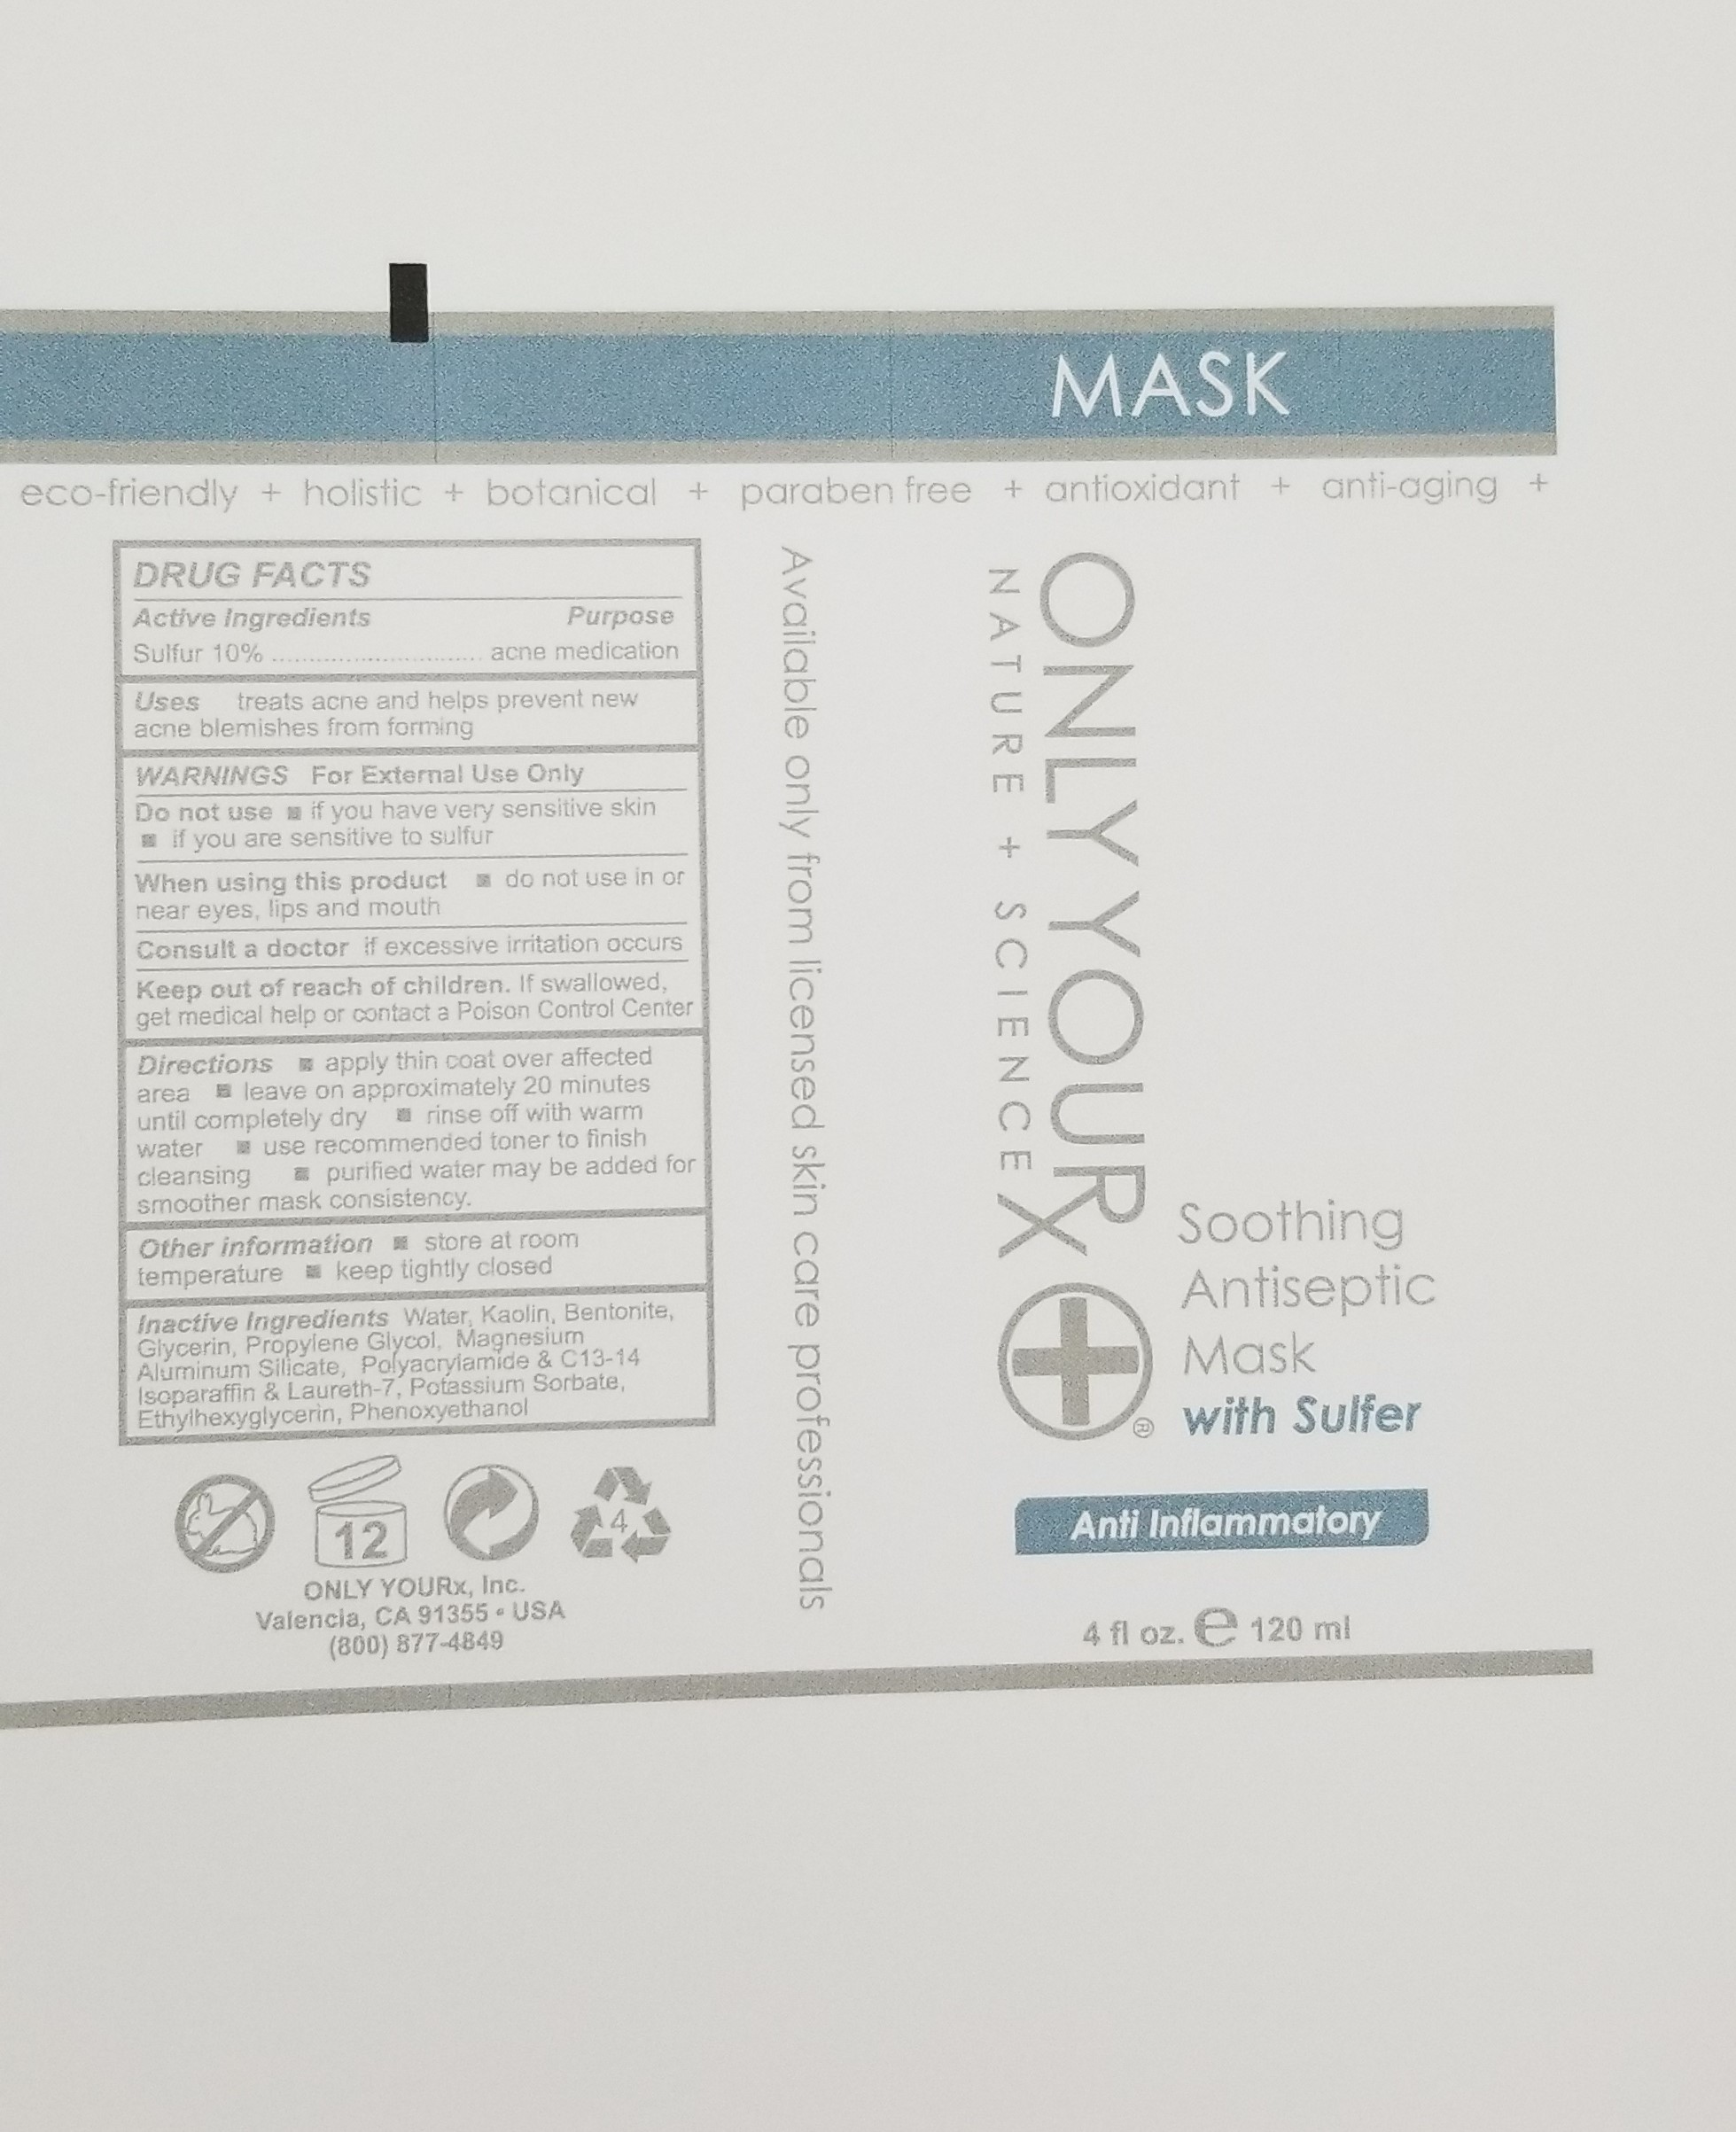 Soothing Antiseptic Mask with Sulfur